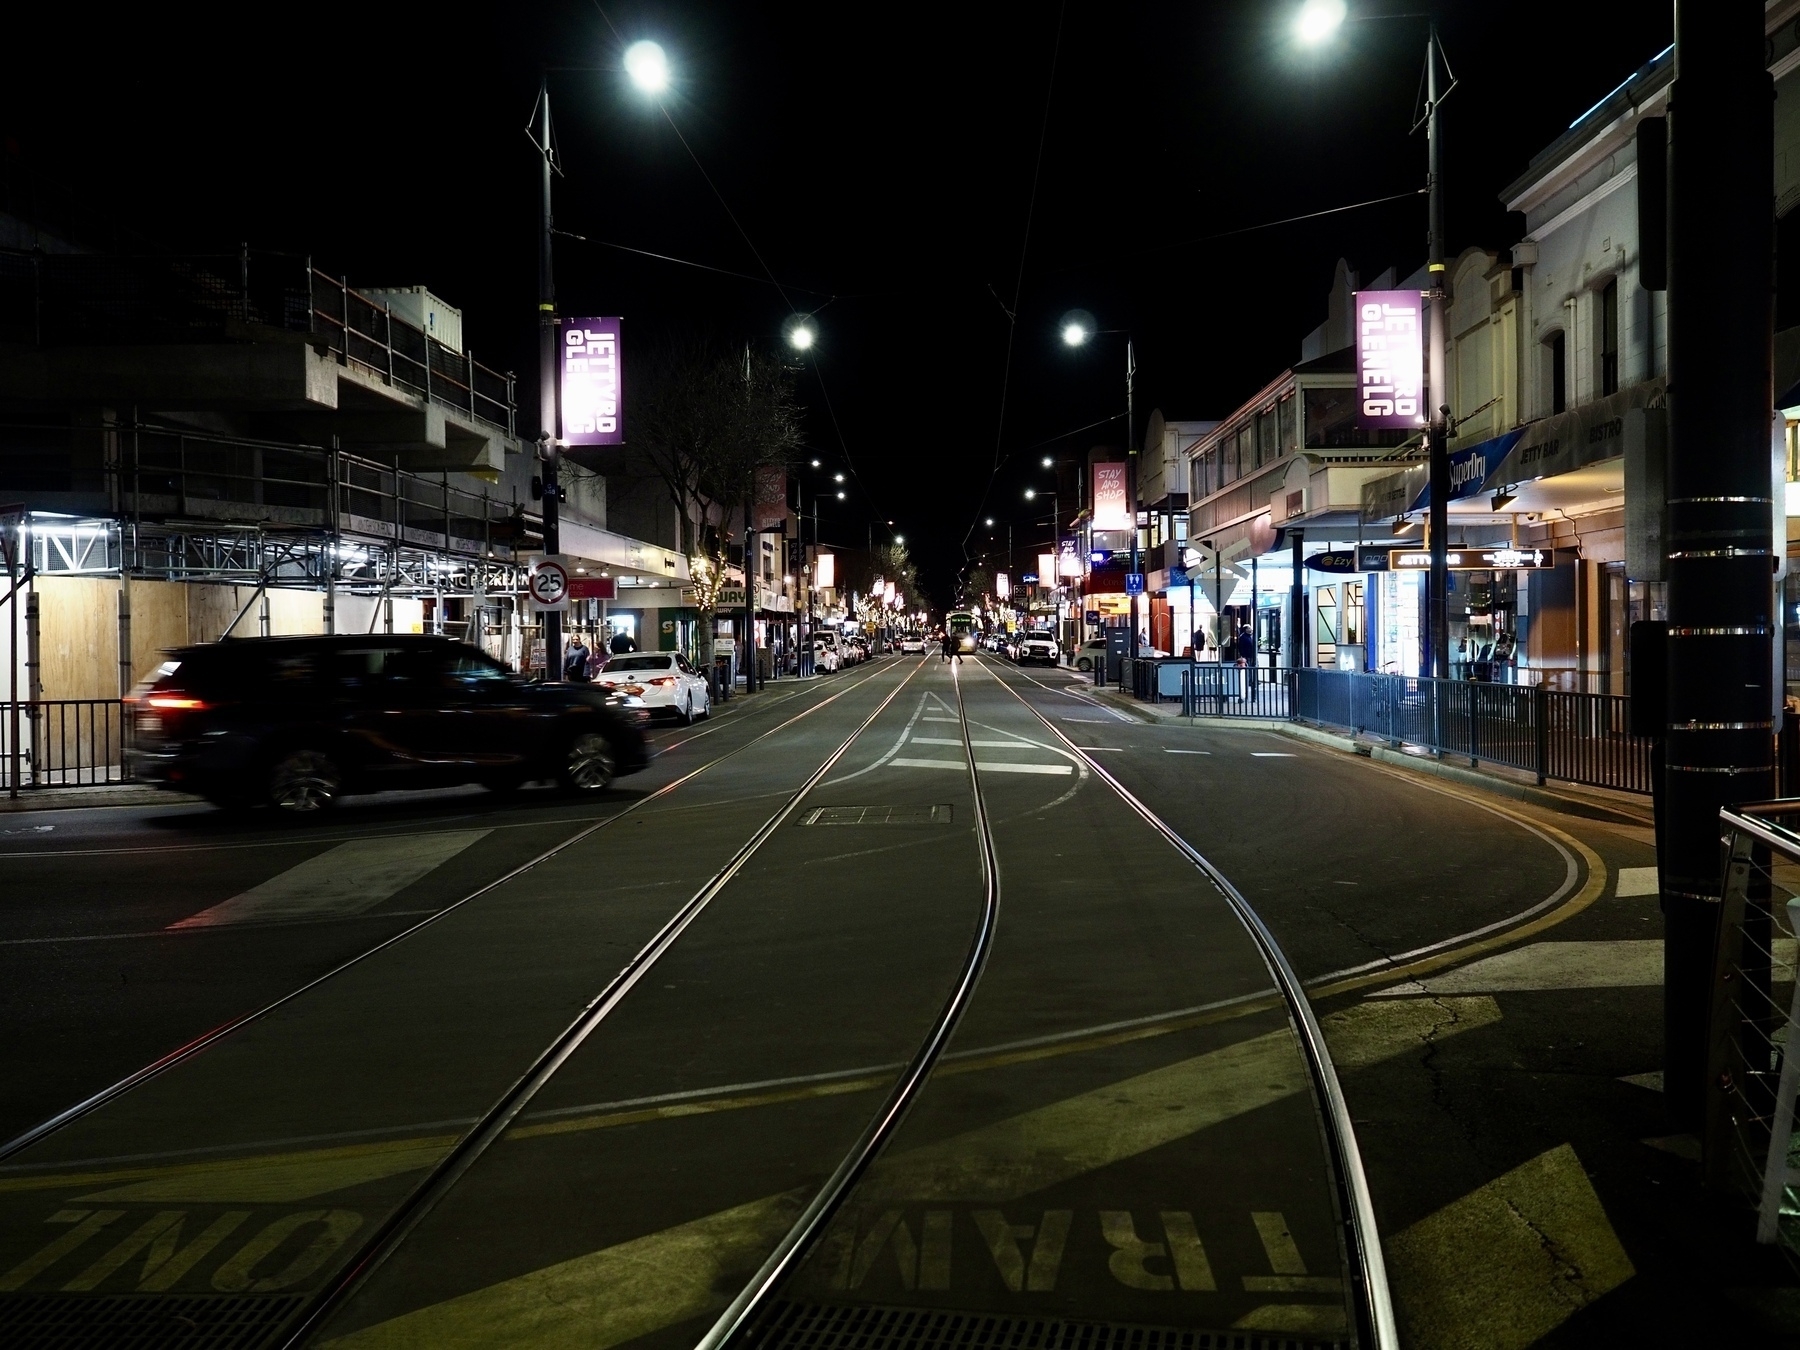 Looking down a street with tram lines at night